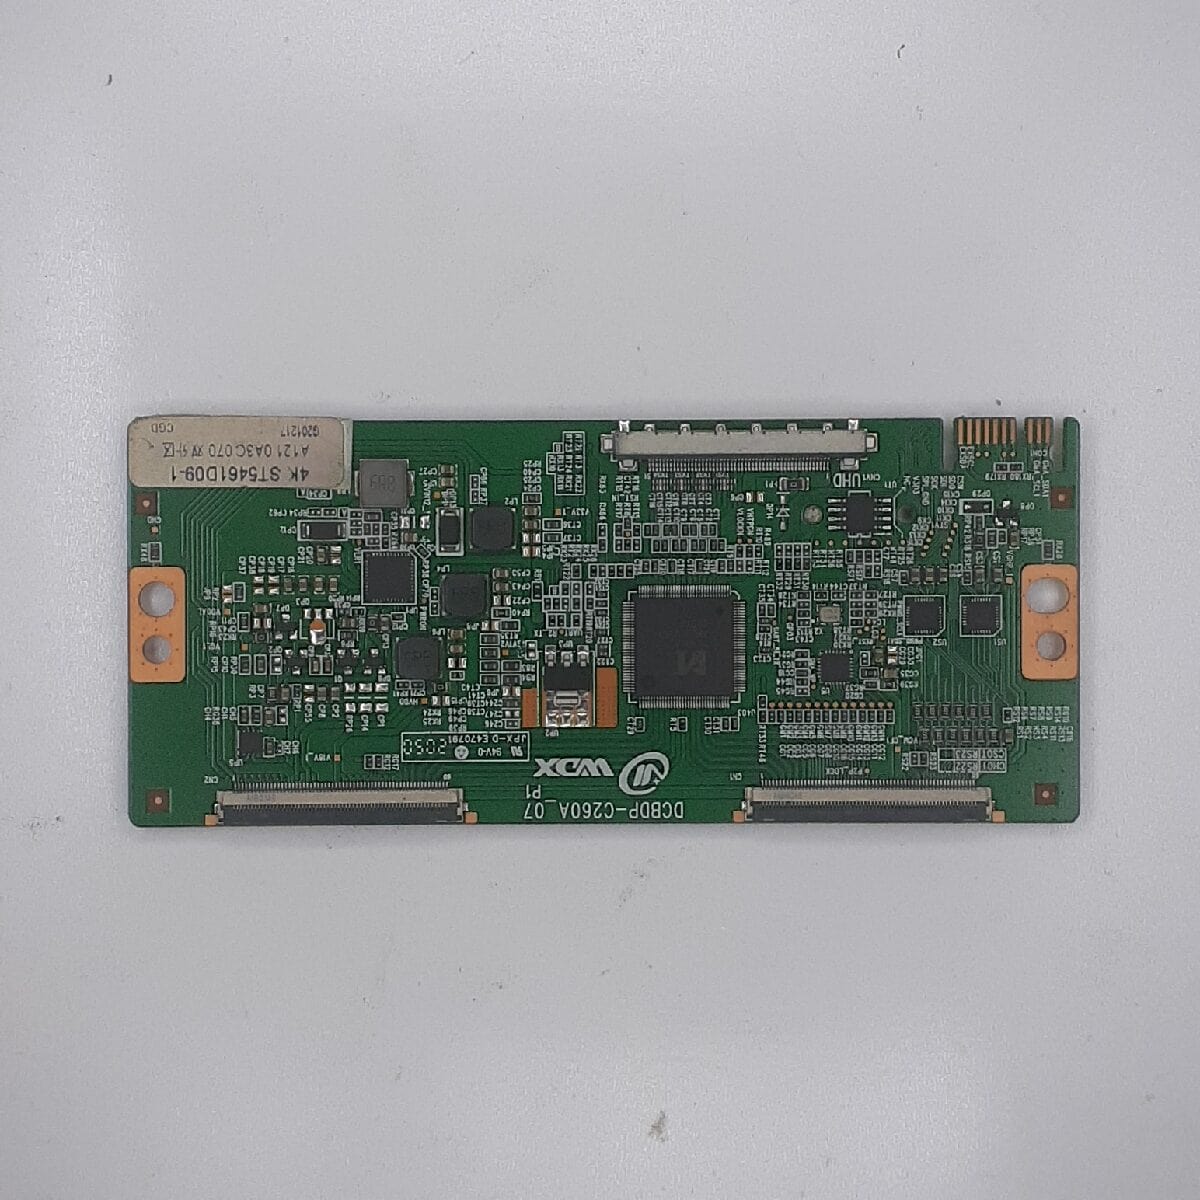 DCBDP-C260A 07 T-CON BOARD FOR LED TV